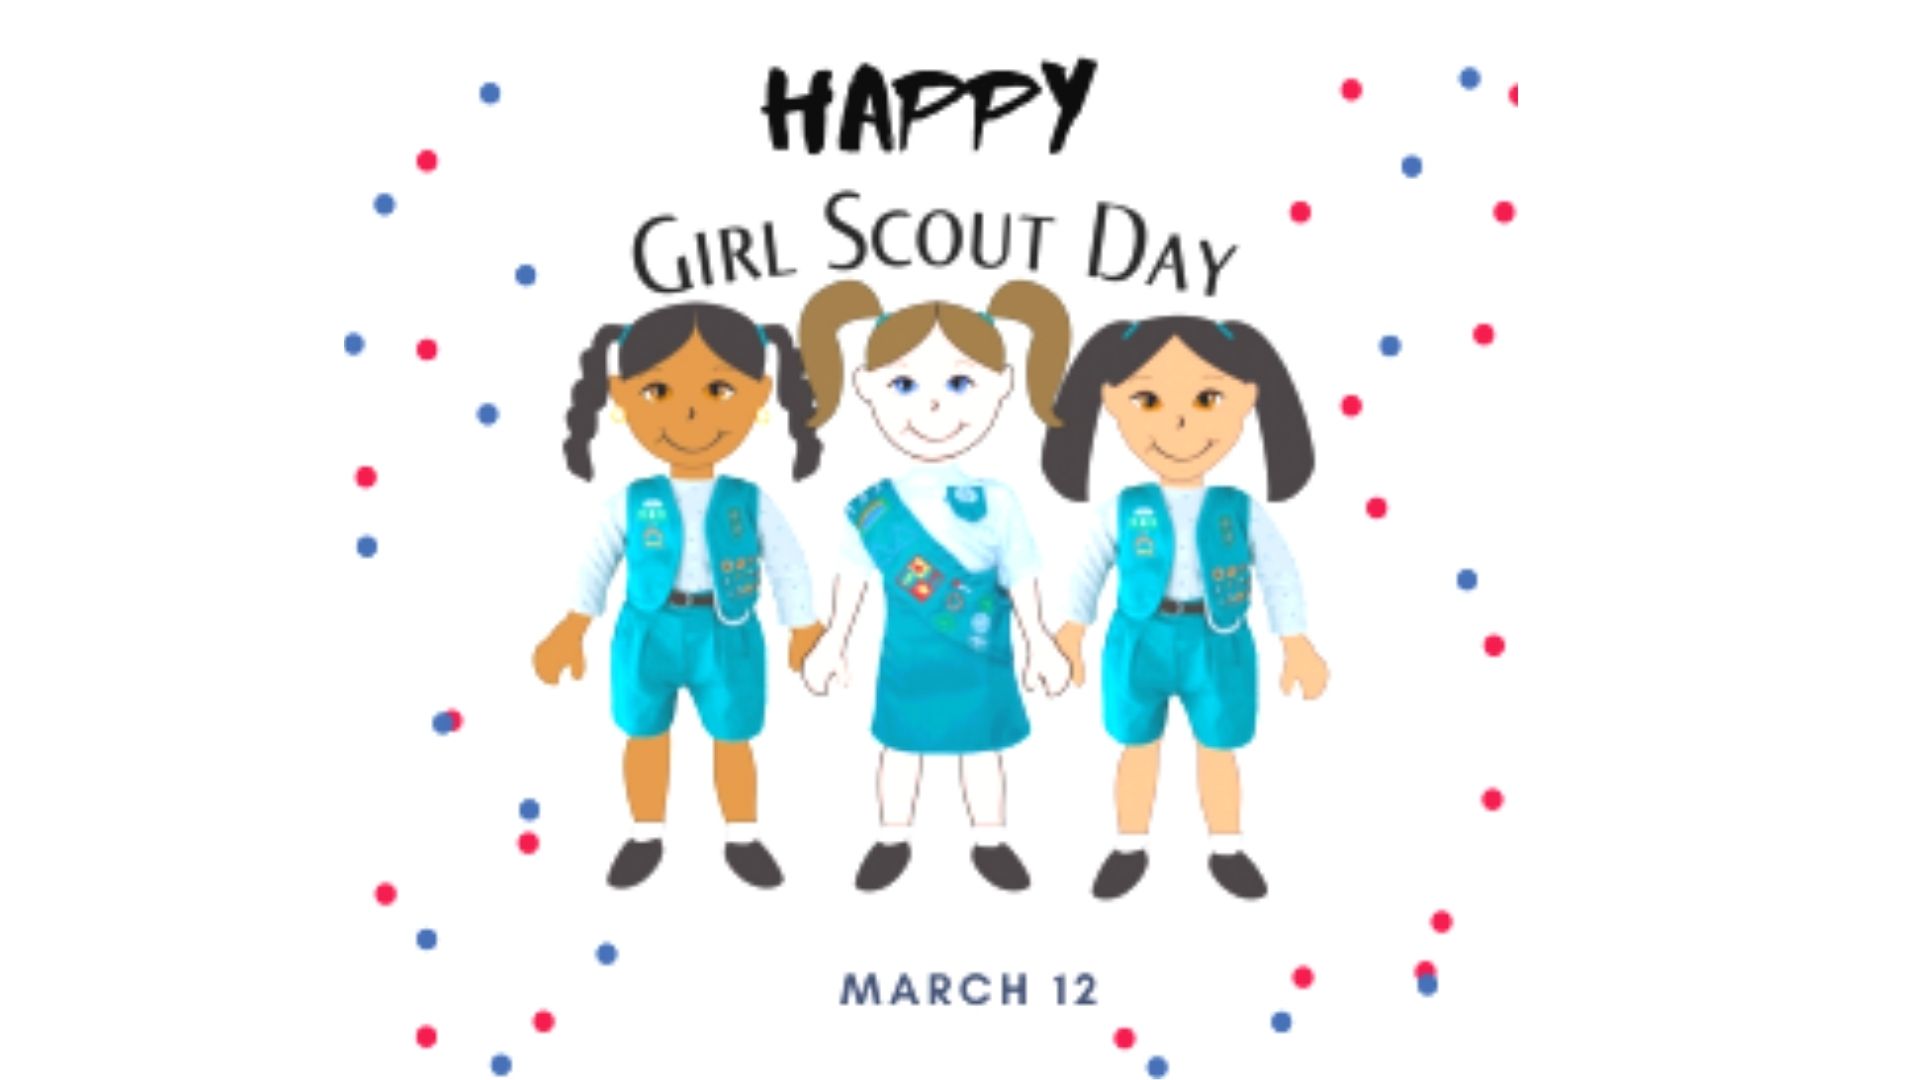 Happy Girl Scout Day Image